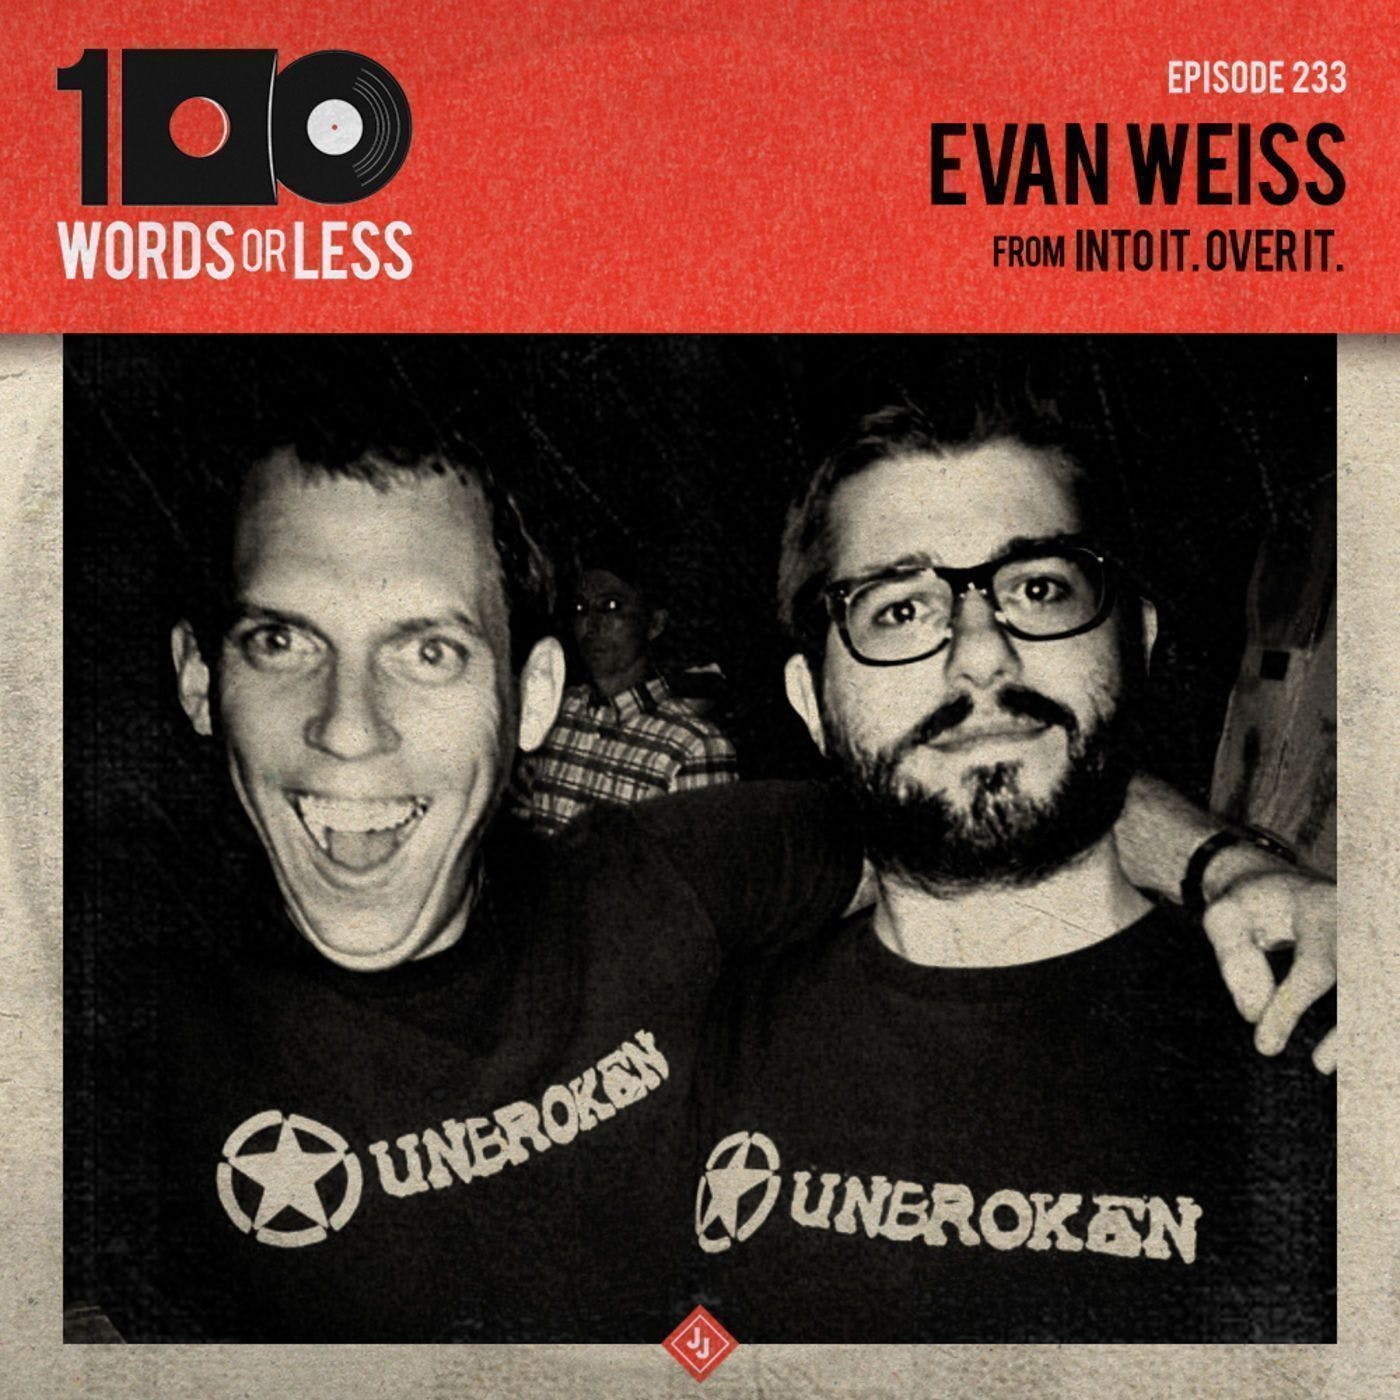 Evan Weiss from Into It. Over It.